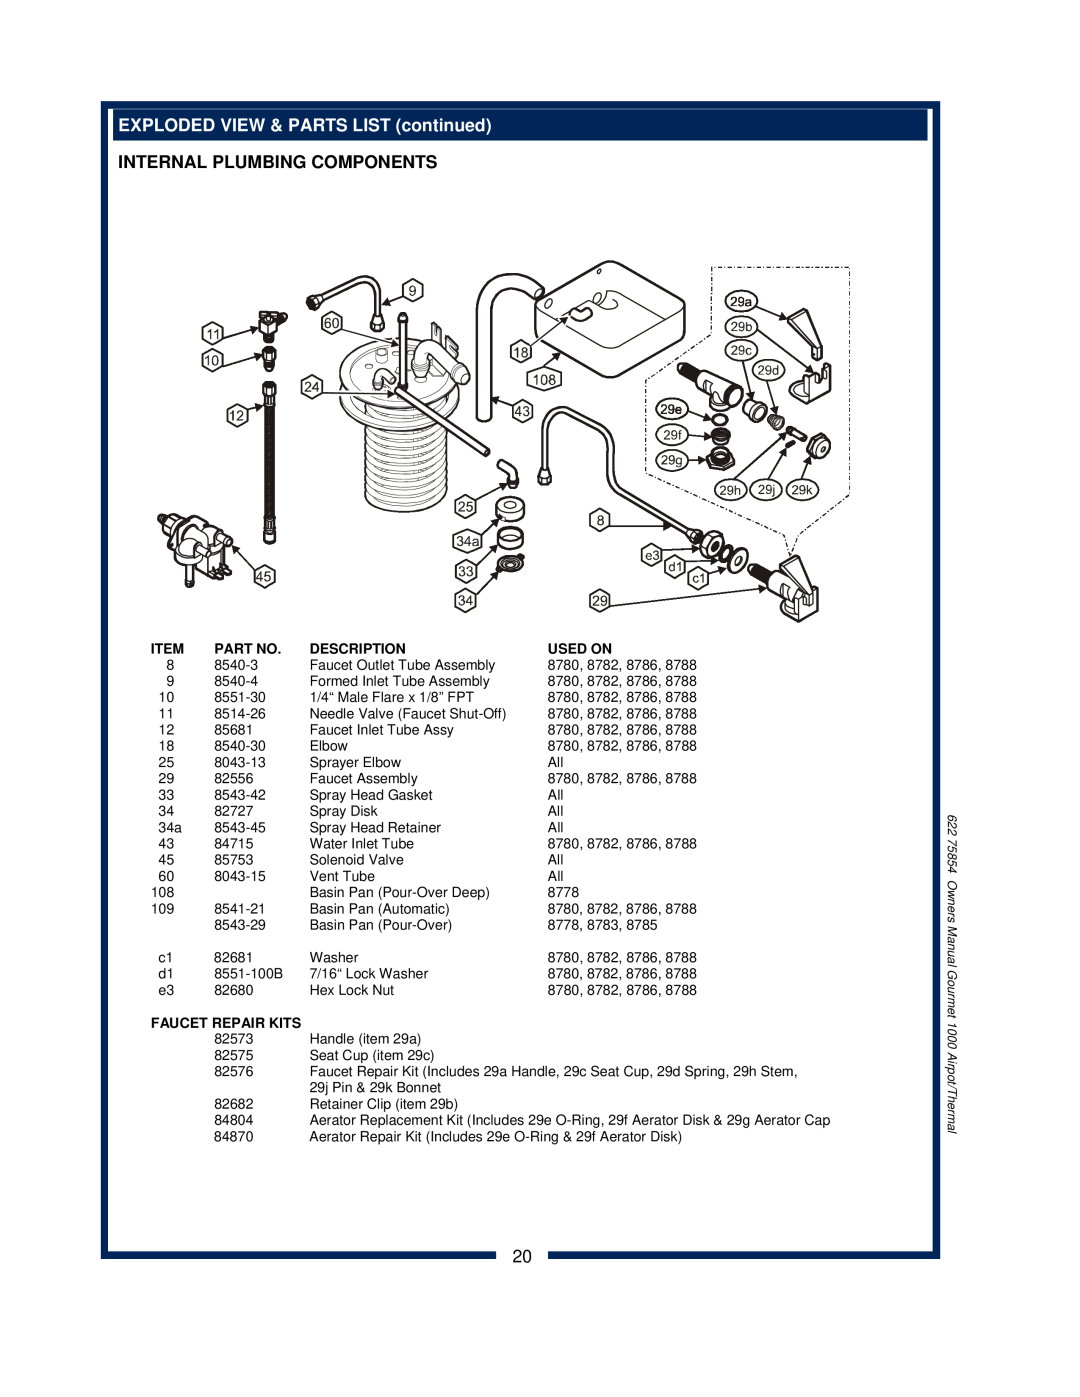 Bloomfield 8783, 8785, 8778, 8786 Internal Plumbing Components, EXPLODED VIEW & PARTS LIST continued, Description, Used On 